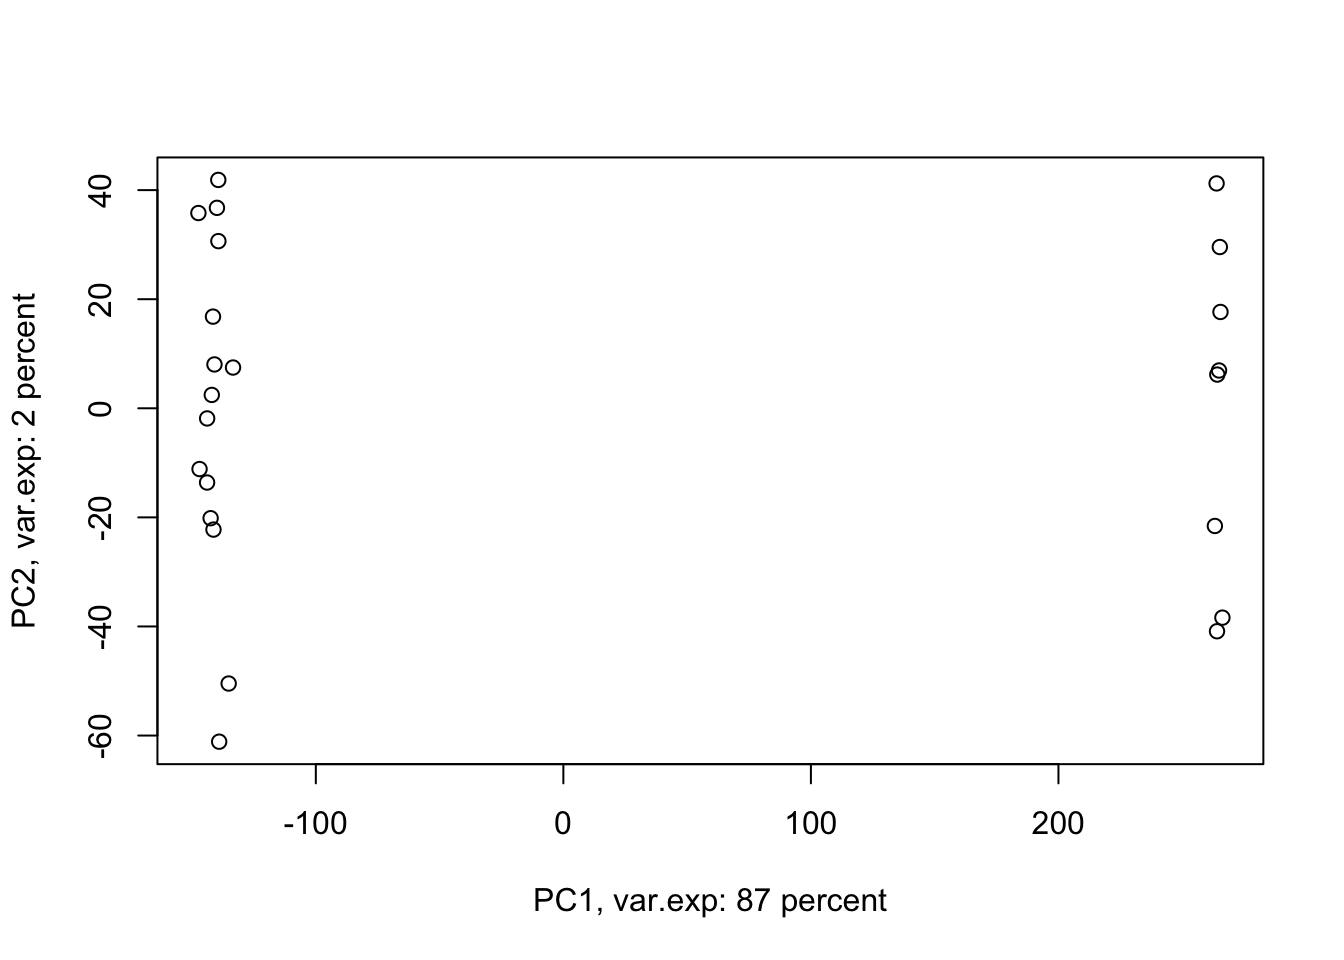 PCA of the data using first two components